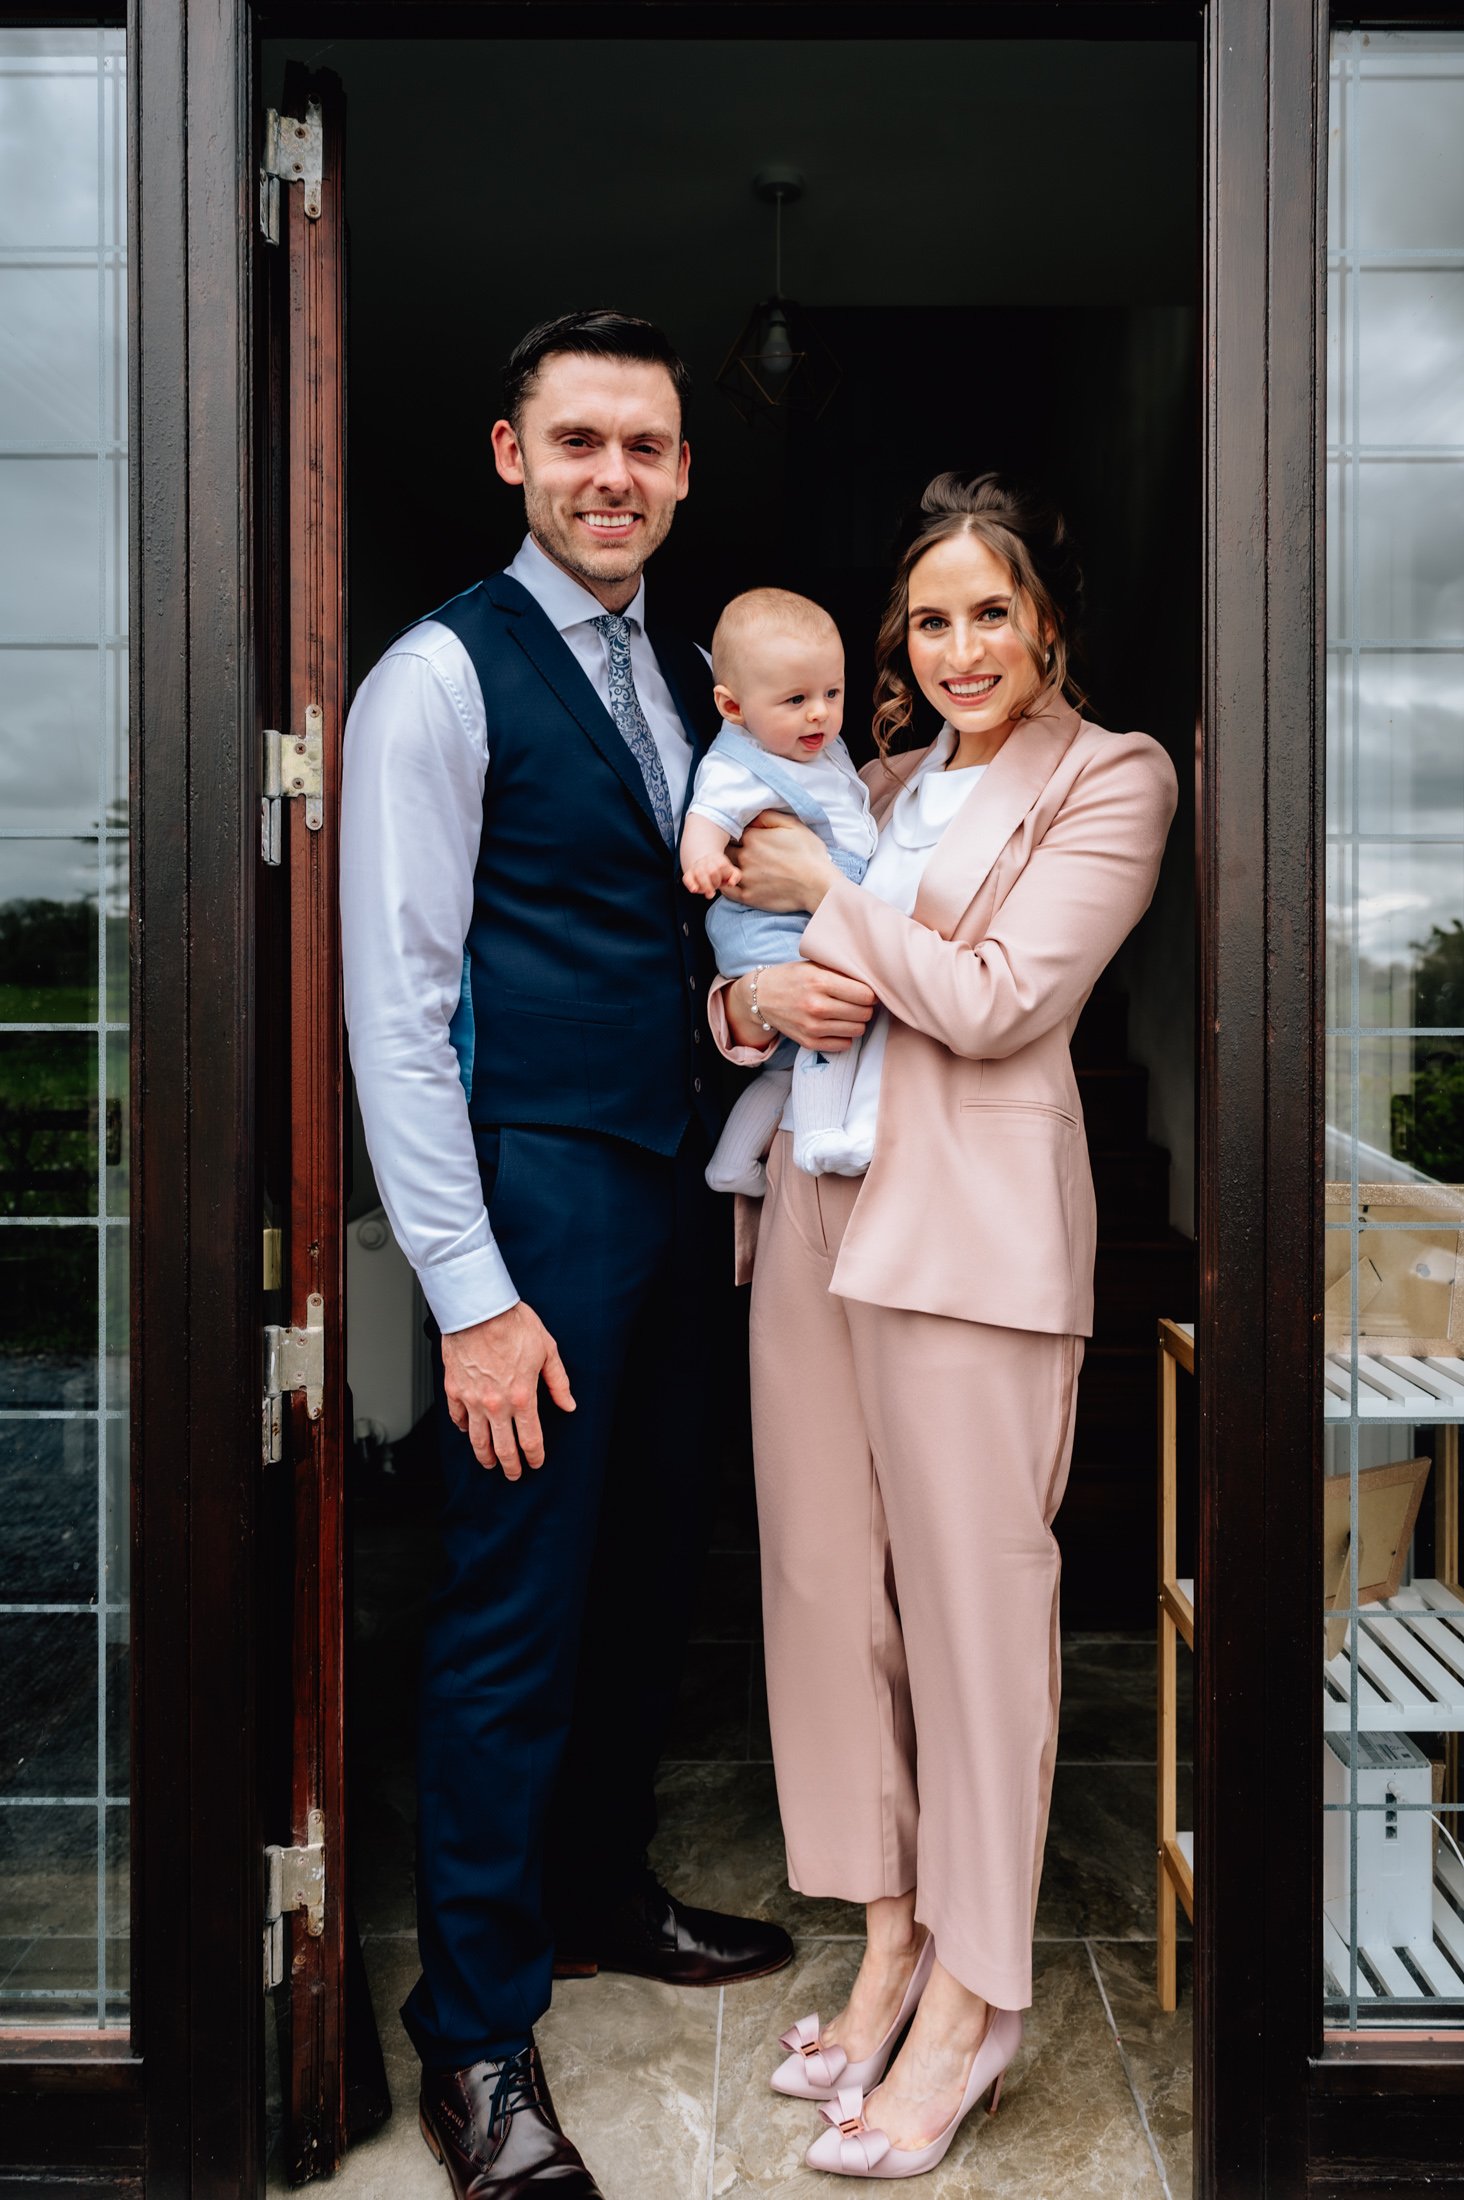 doorway family portrait lifestyle photo session in home christening photos limerick photographer